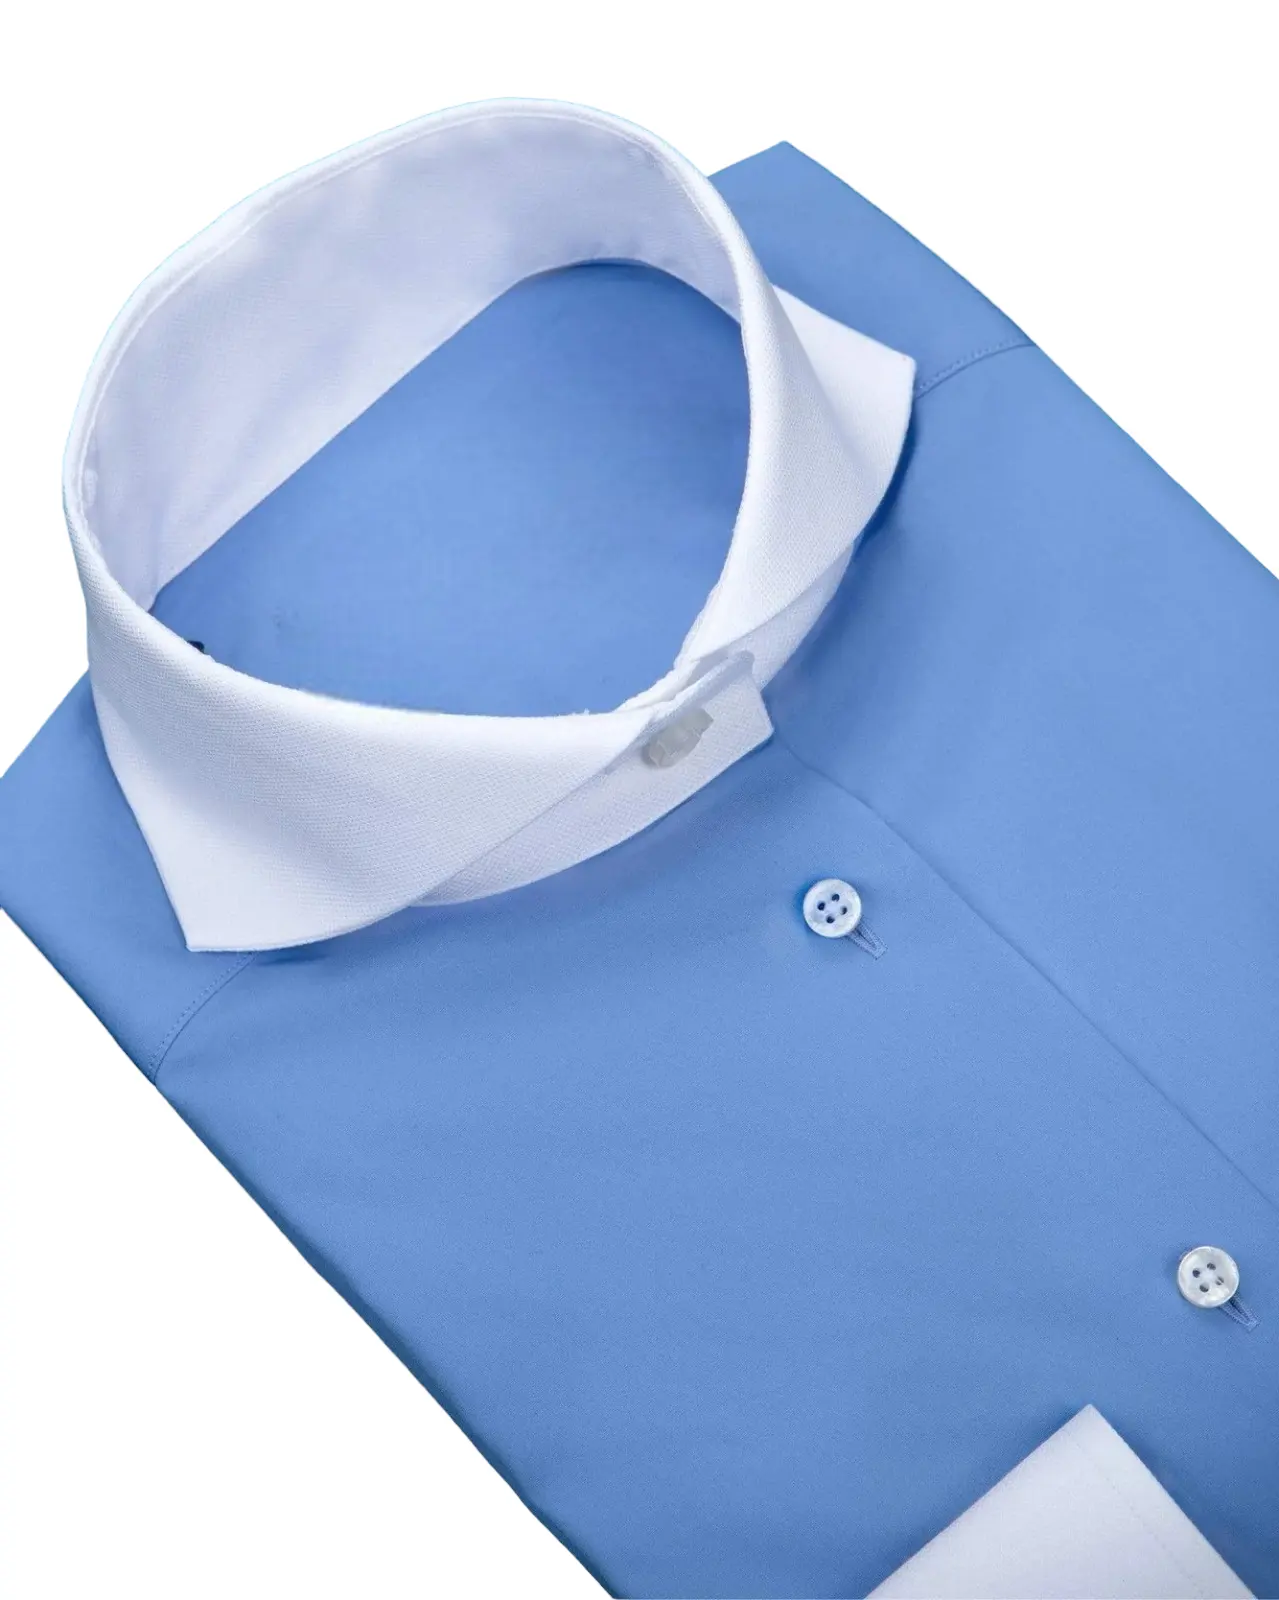 Stylish Sky Blue White French Collar and Cuffs Plain Men's Formal Office and Work wear Dress Shirt